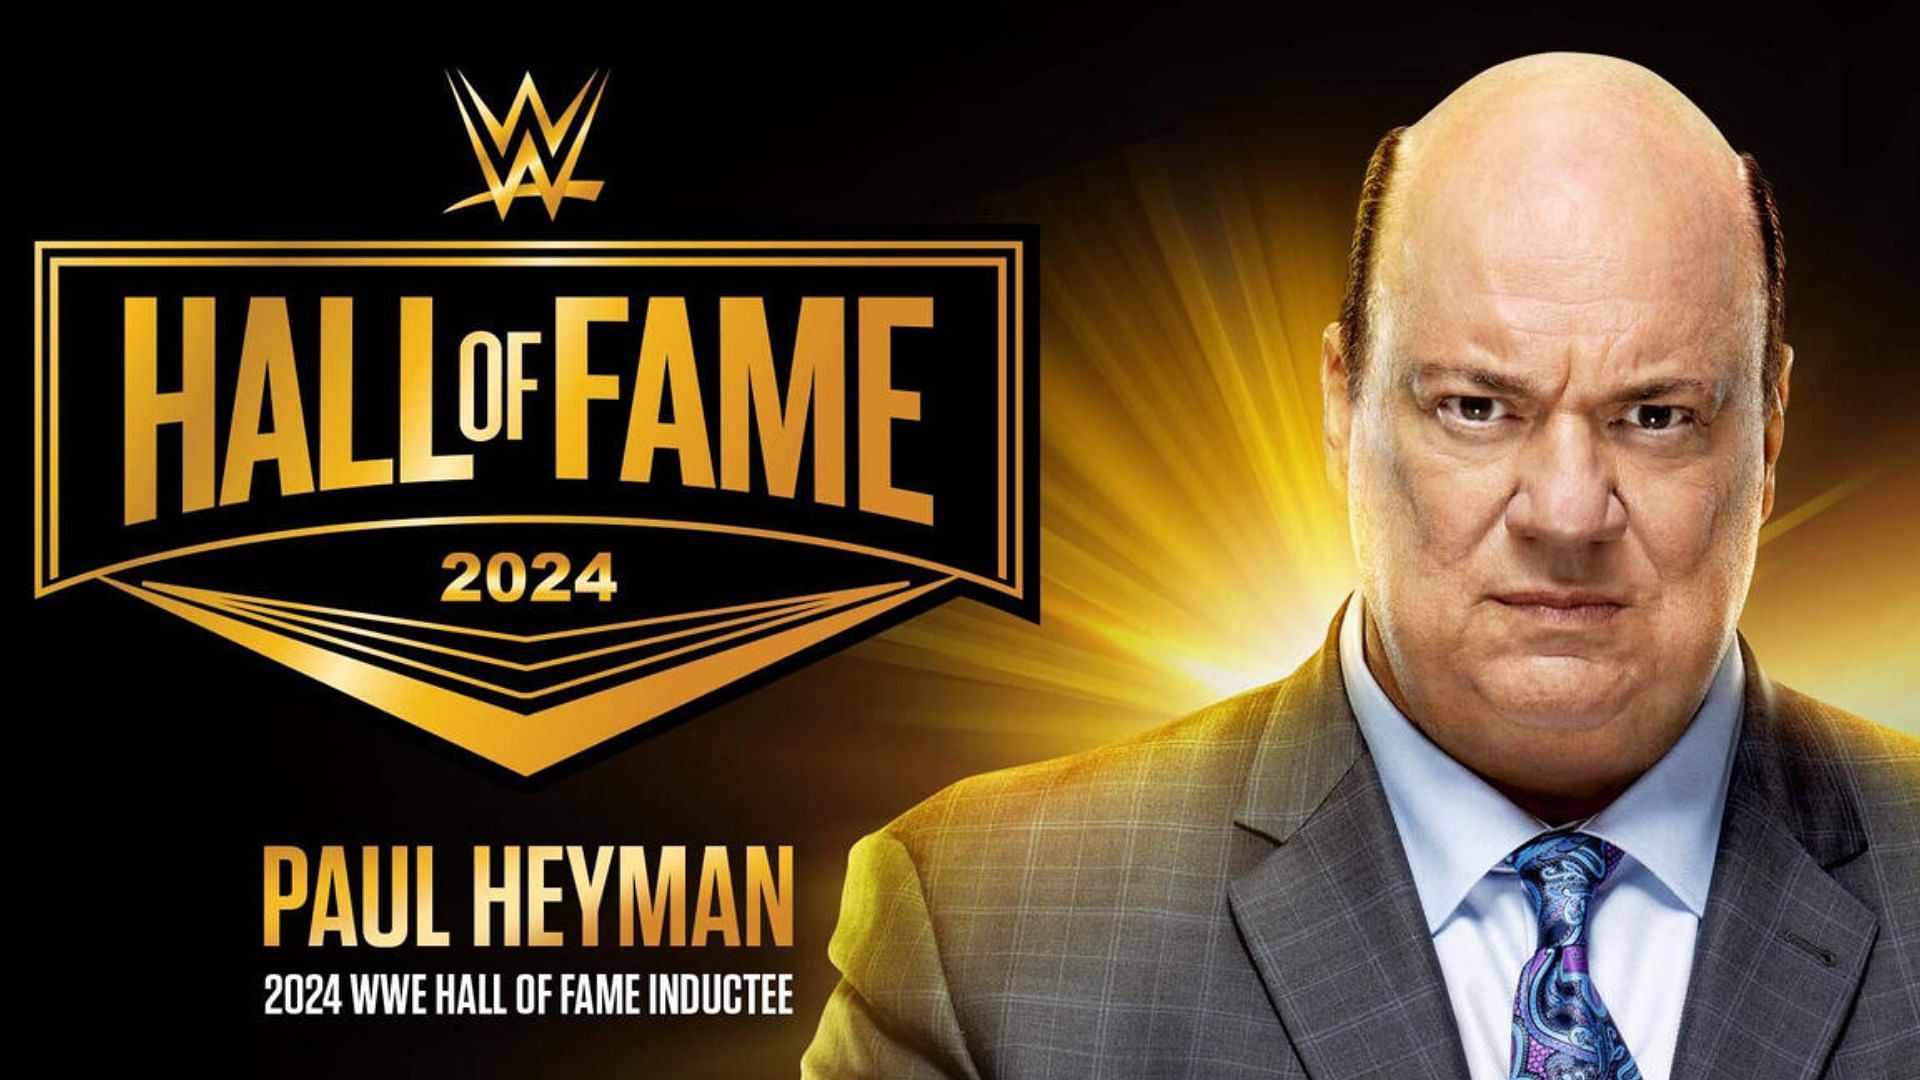 Heyman was inducted into the Hall of Fame tonight.